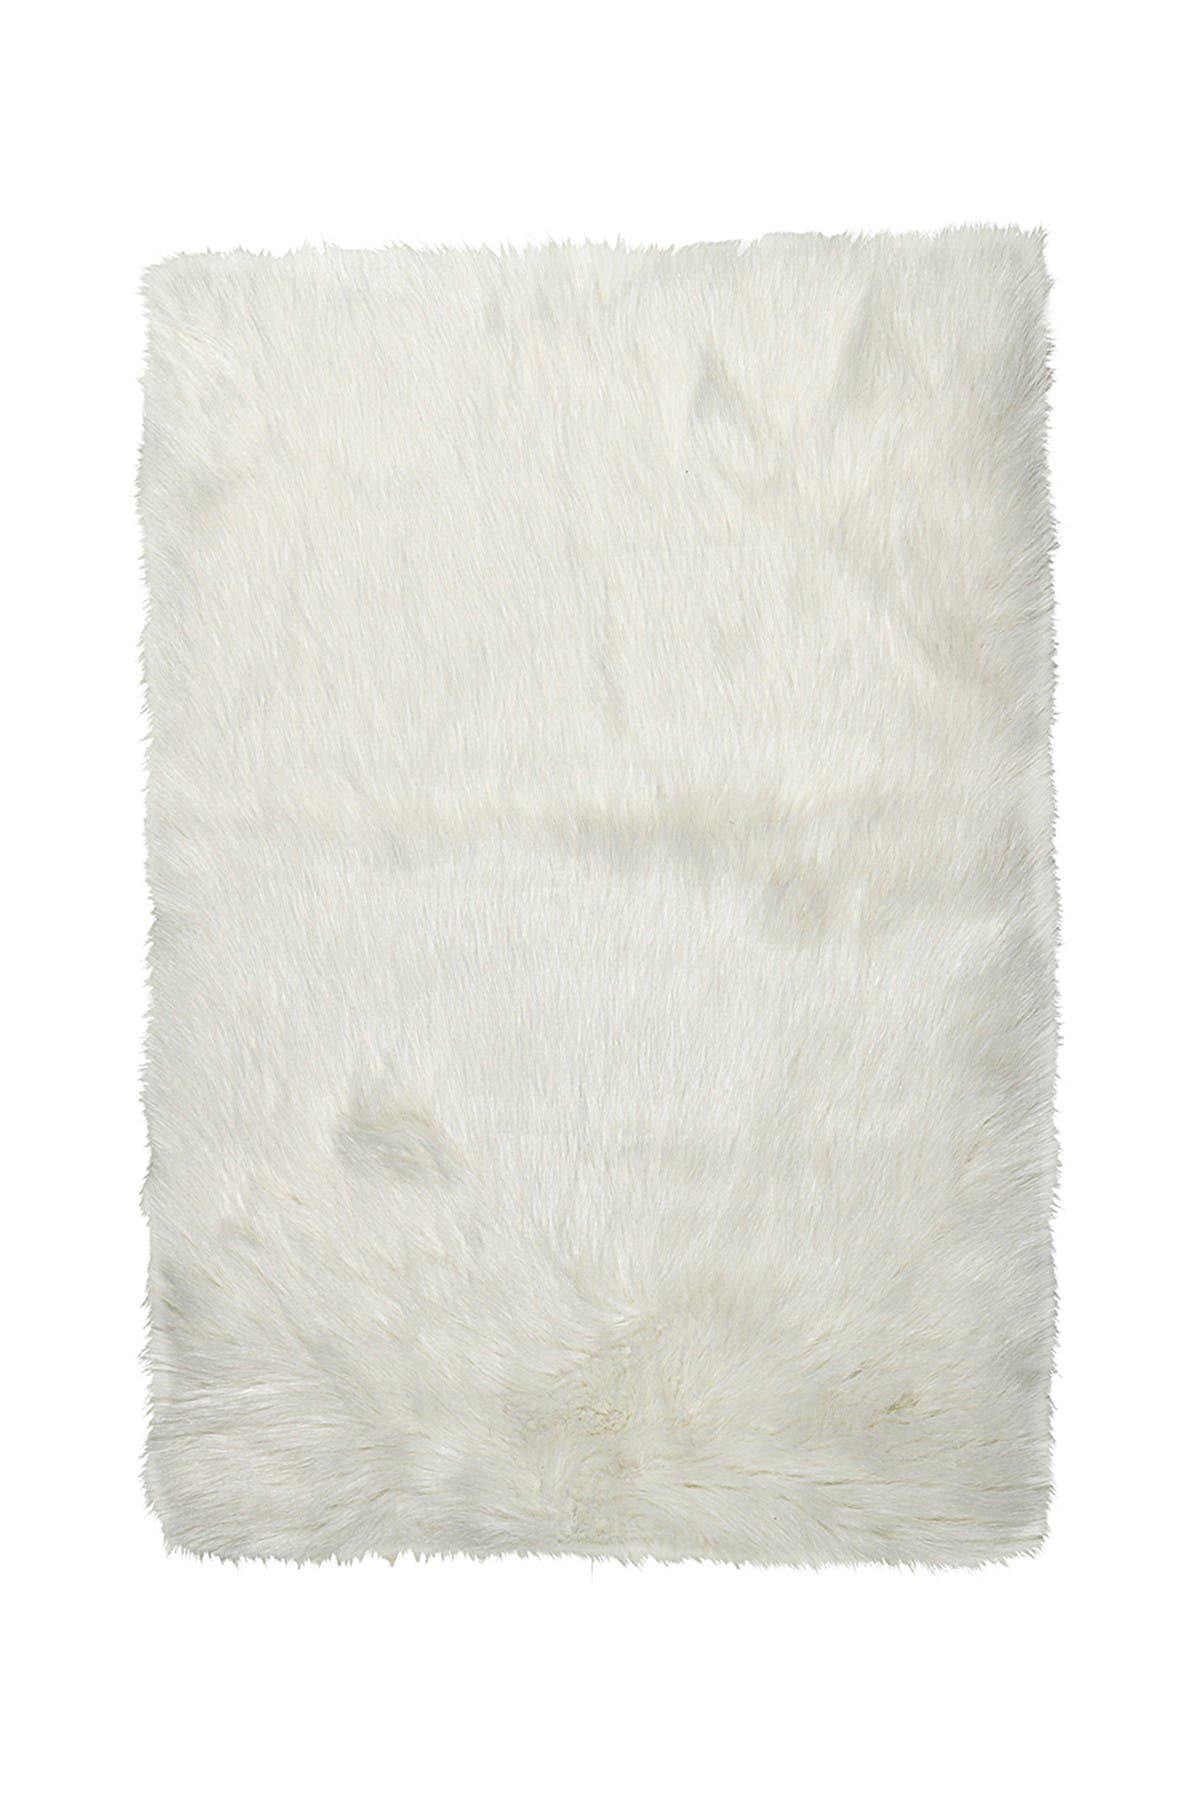 Luxe Hudson Faux Fur Area Rug Throw In, Faux Fur Area Rug White